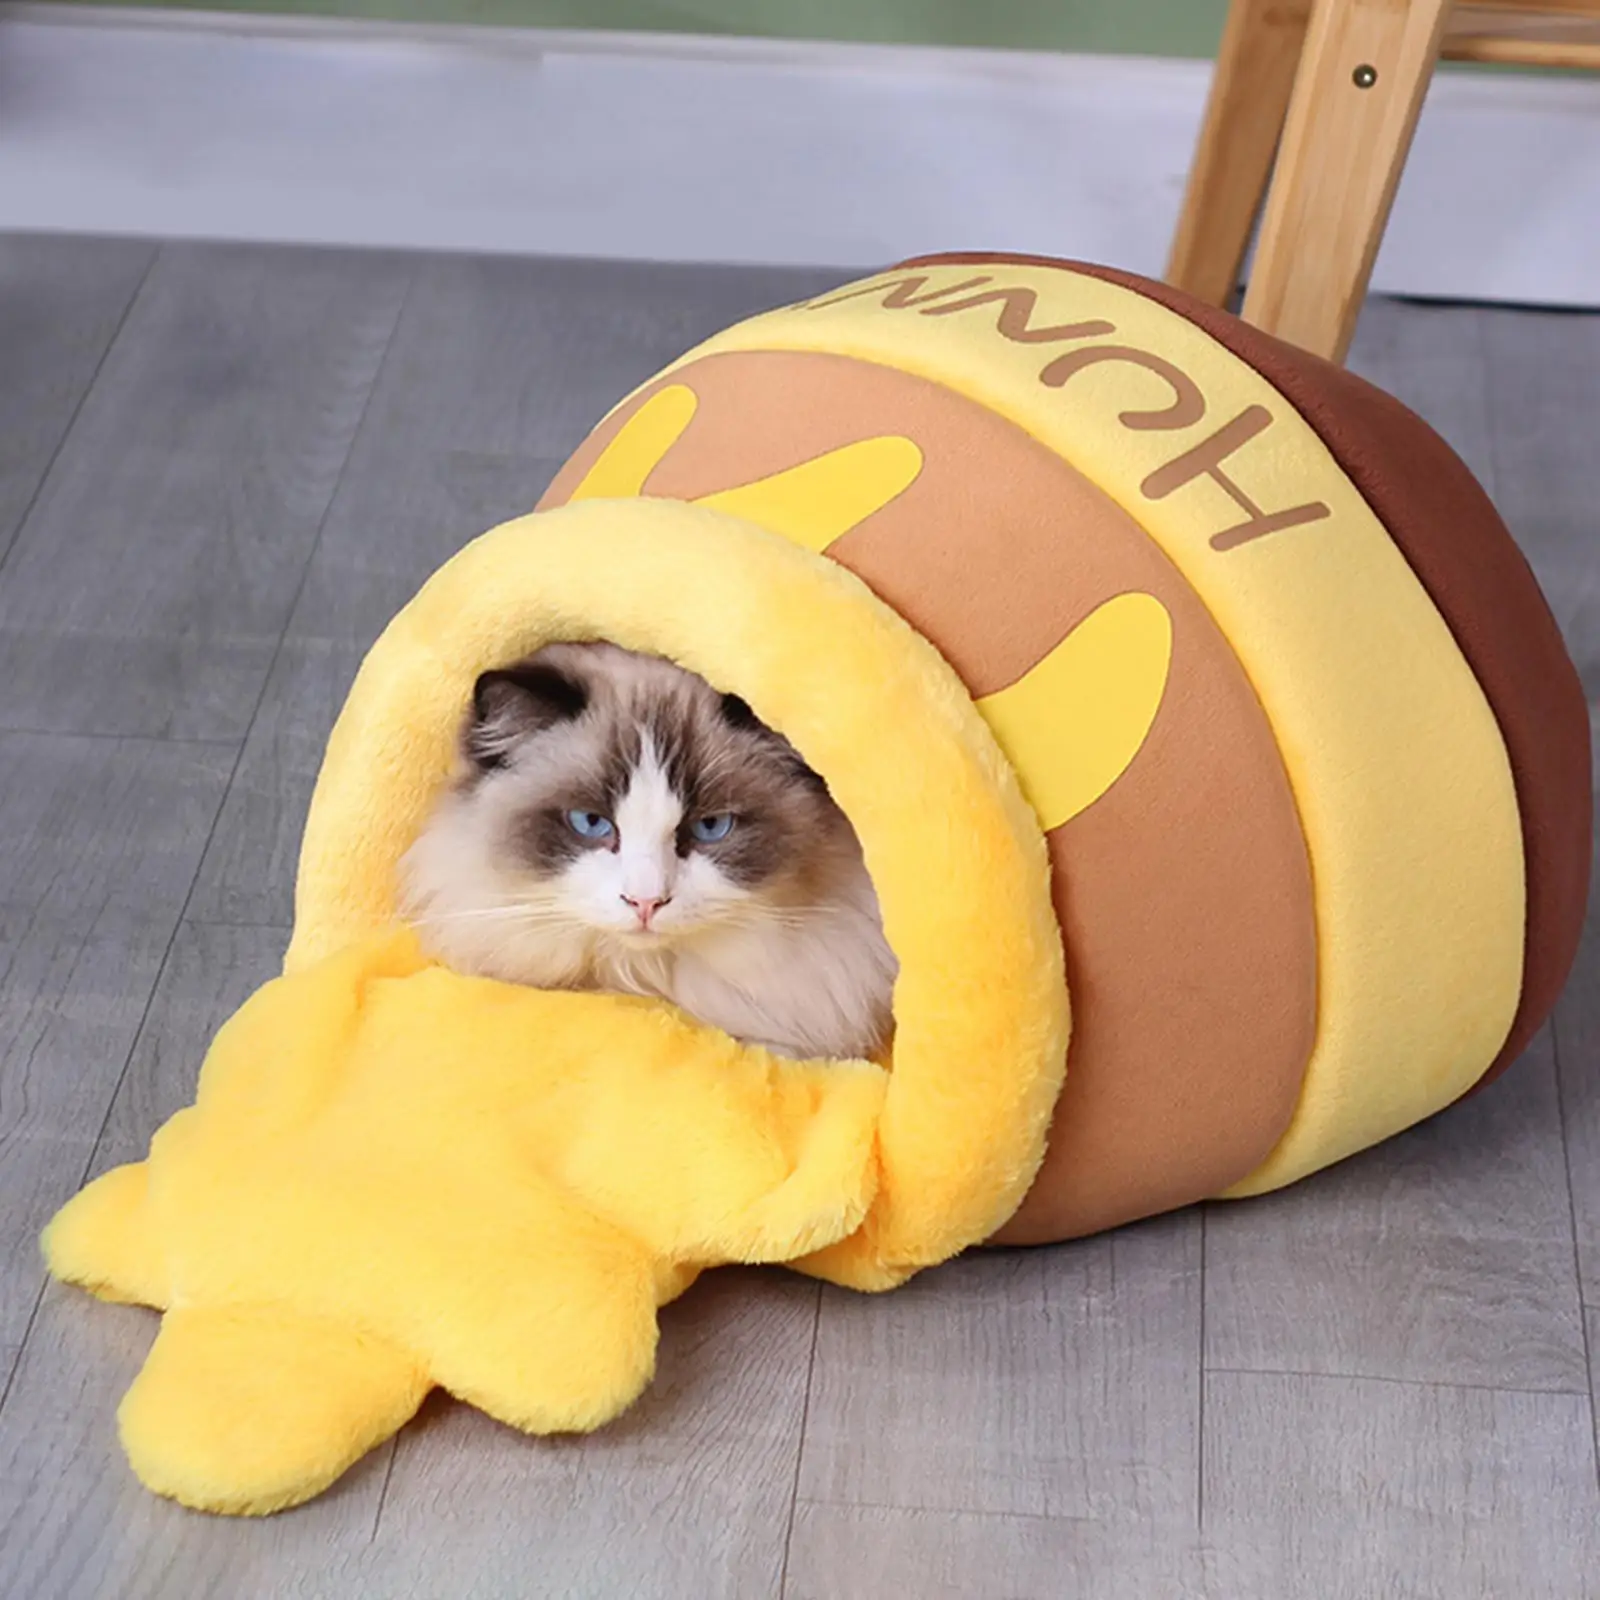 Honey Pot Pet Cat Bed Cozy Cave Removable Cushion House Sleep Bed Warm Soft